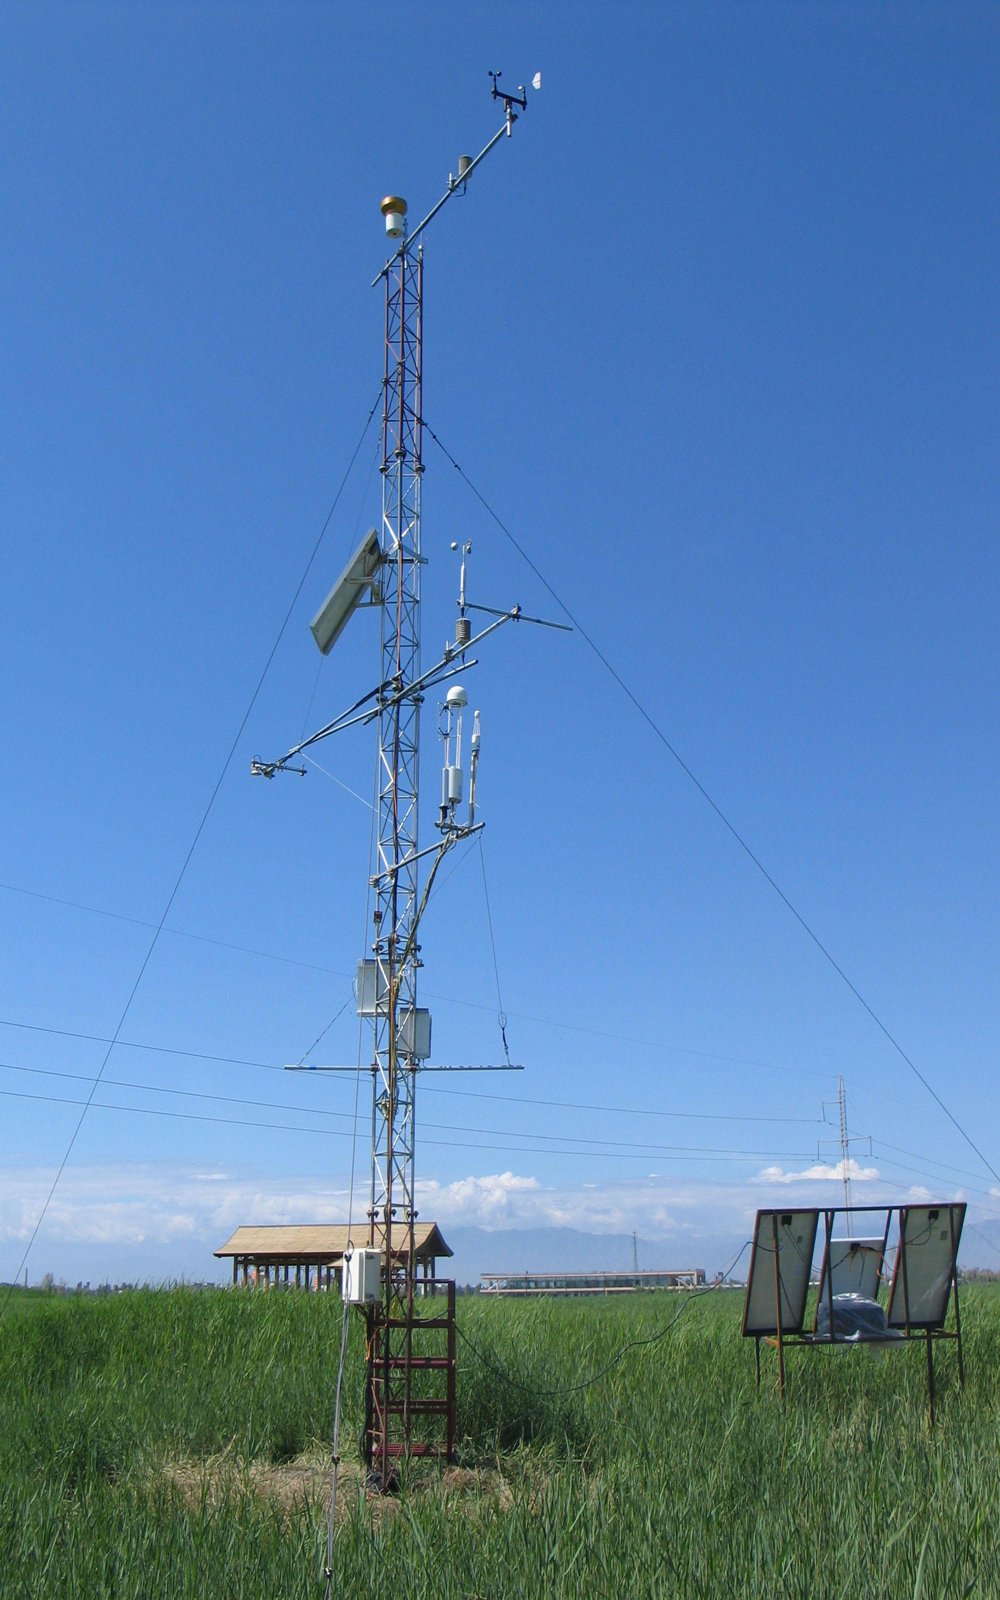 Qilian Mountains integrated observatory network: Dataset of Heihe integrated observatory network (automatic weather station of Zhangye wetland station, 2020)